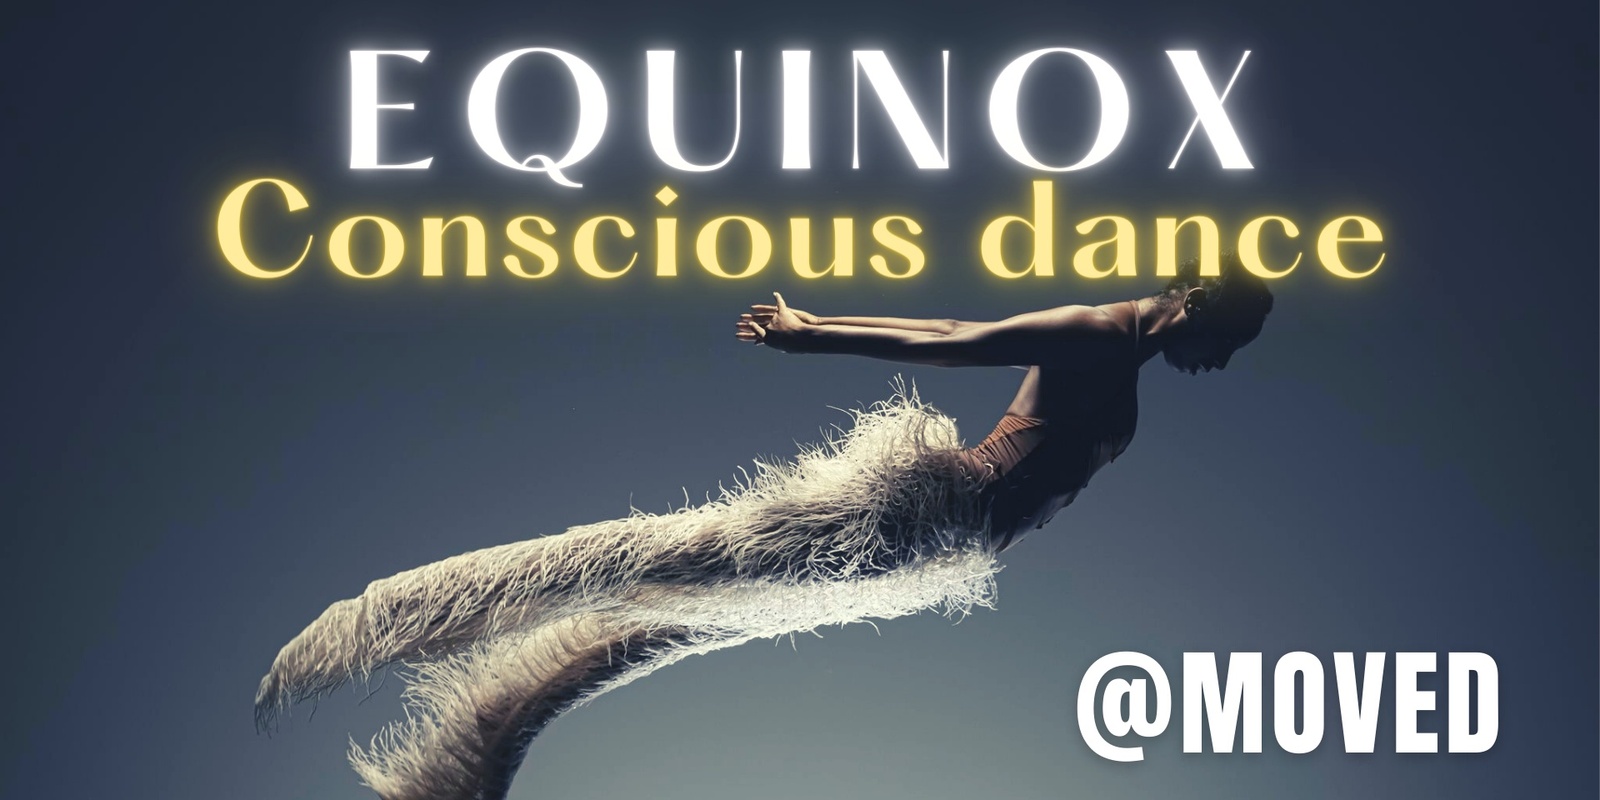 Banner image for Equinox Conscious Dance @MOVED